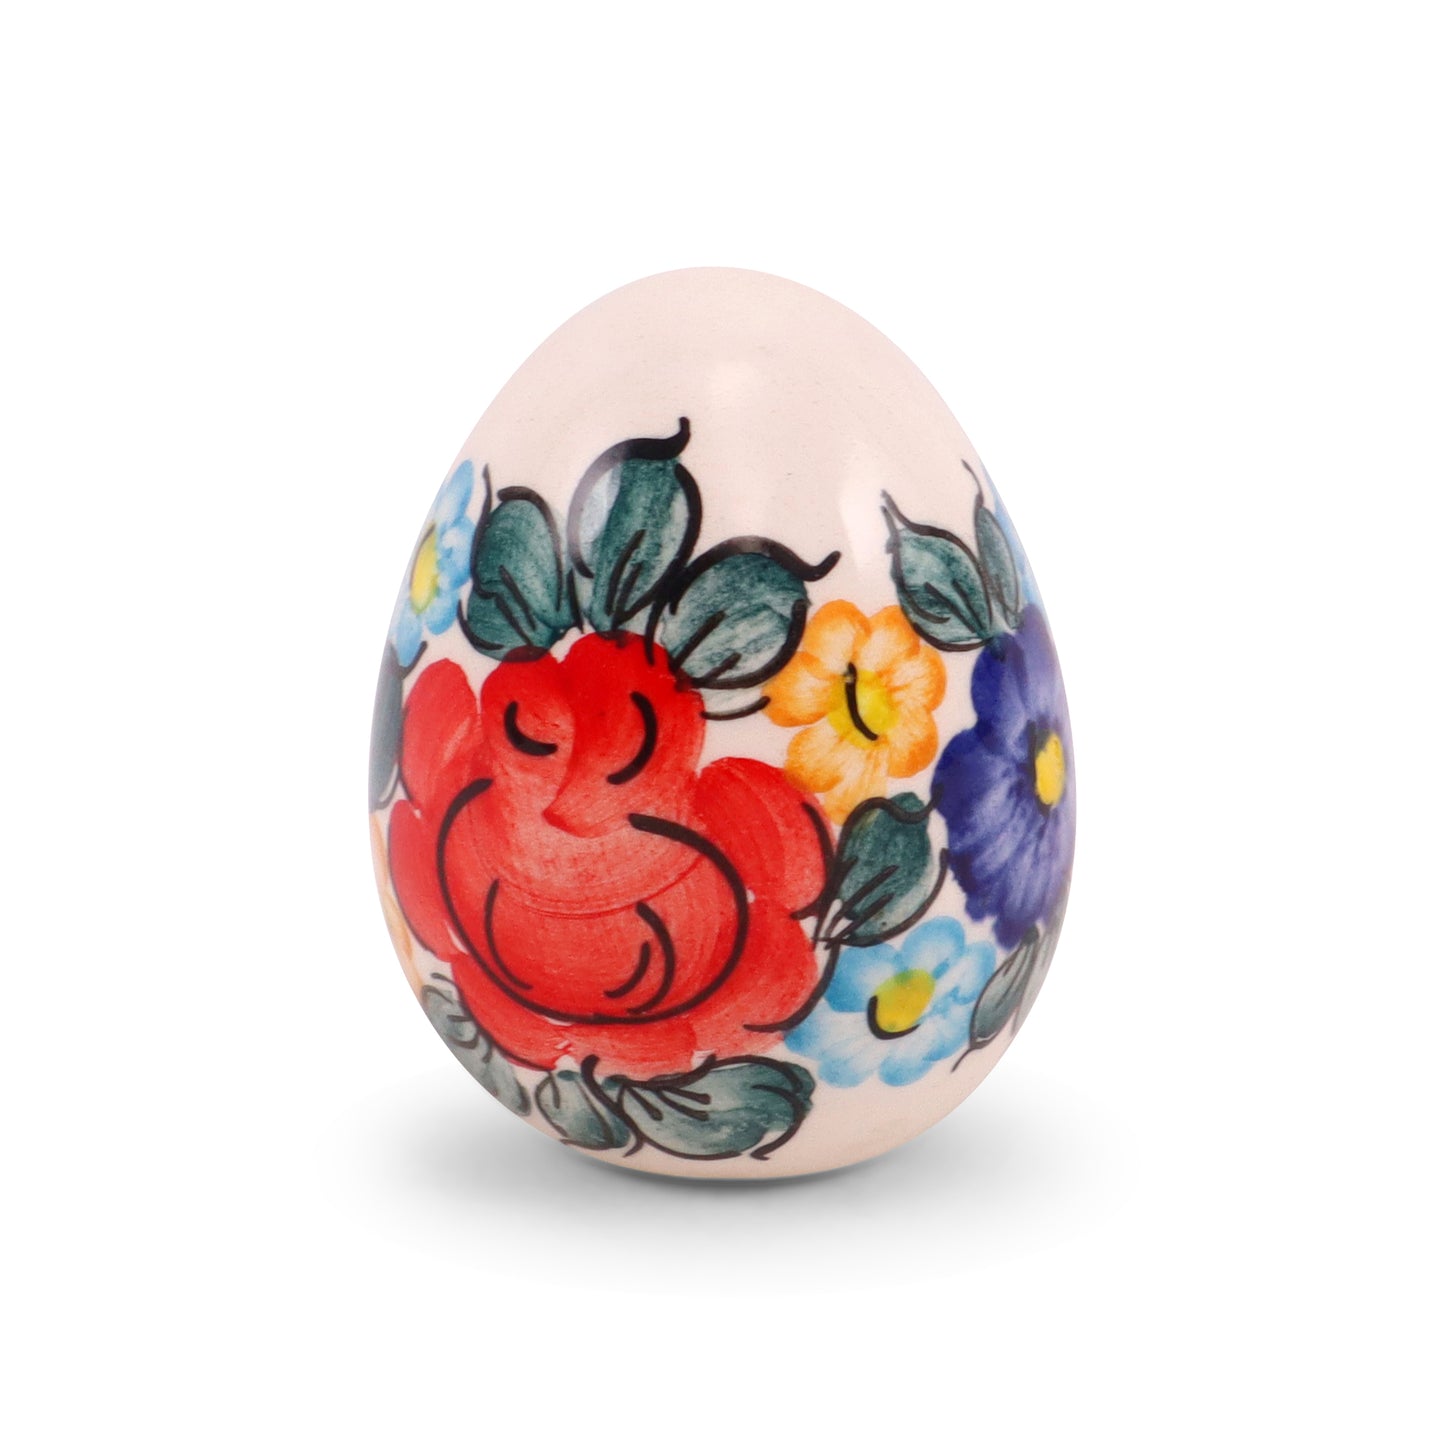 2"x2.5" Egg Figurine. Pattern: Colorful